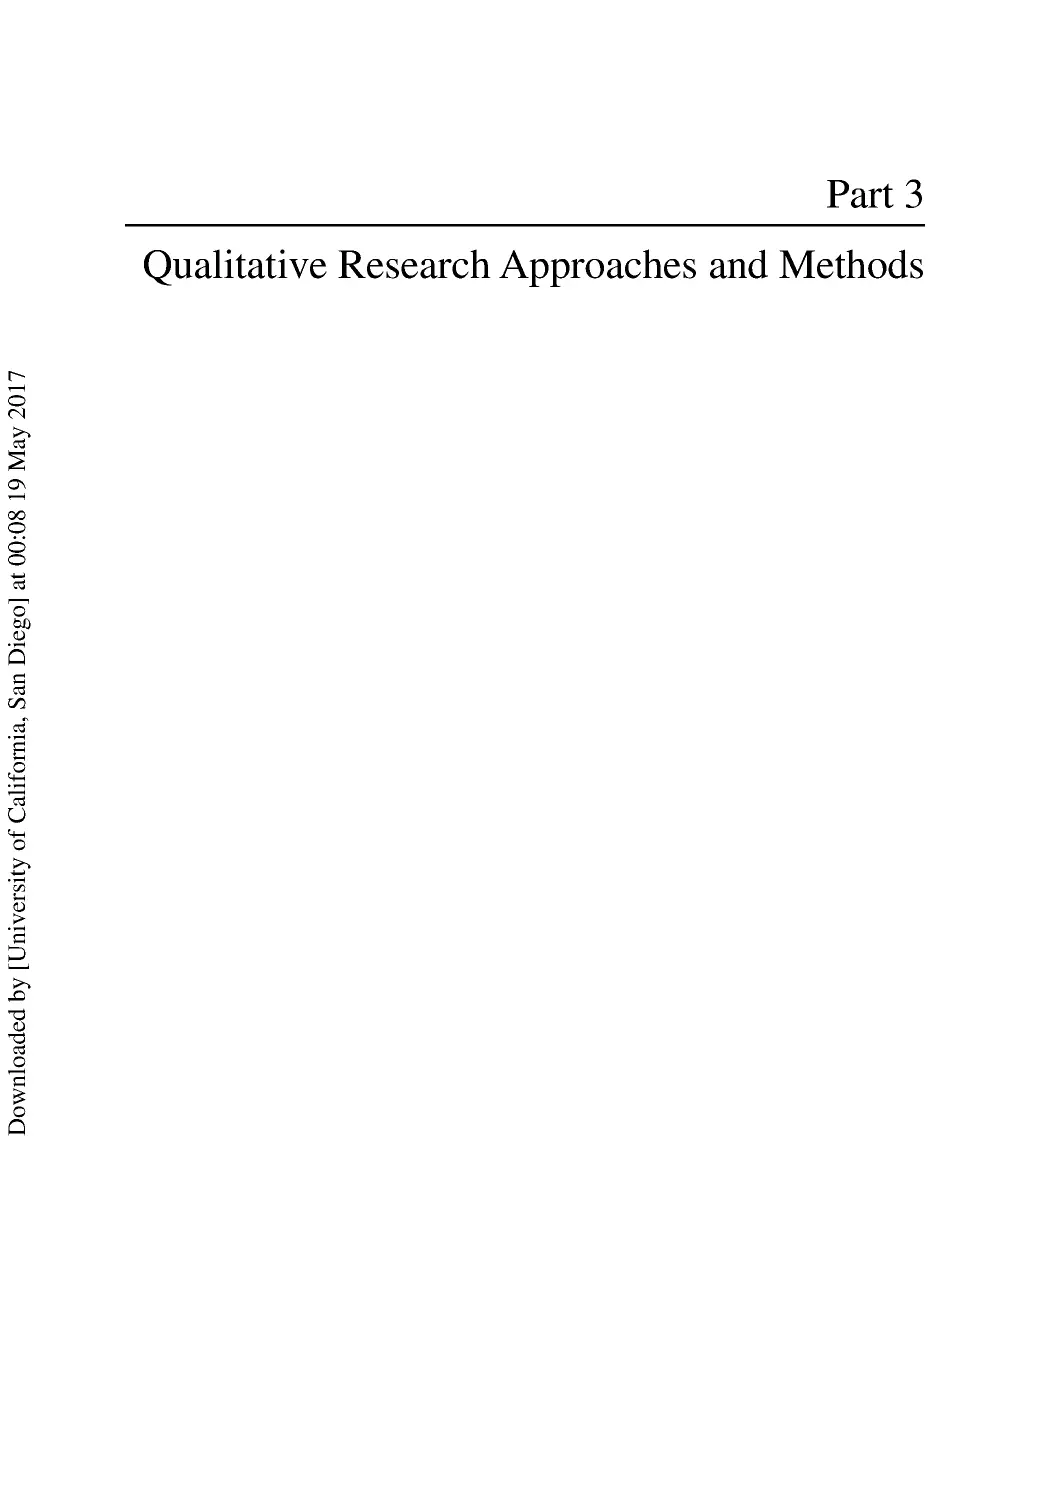 Part 3 Qualitative Research Approaches and Methods